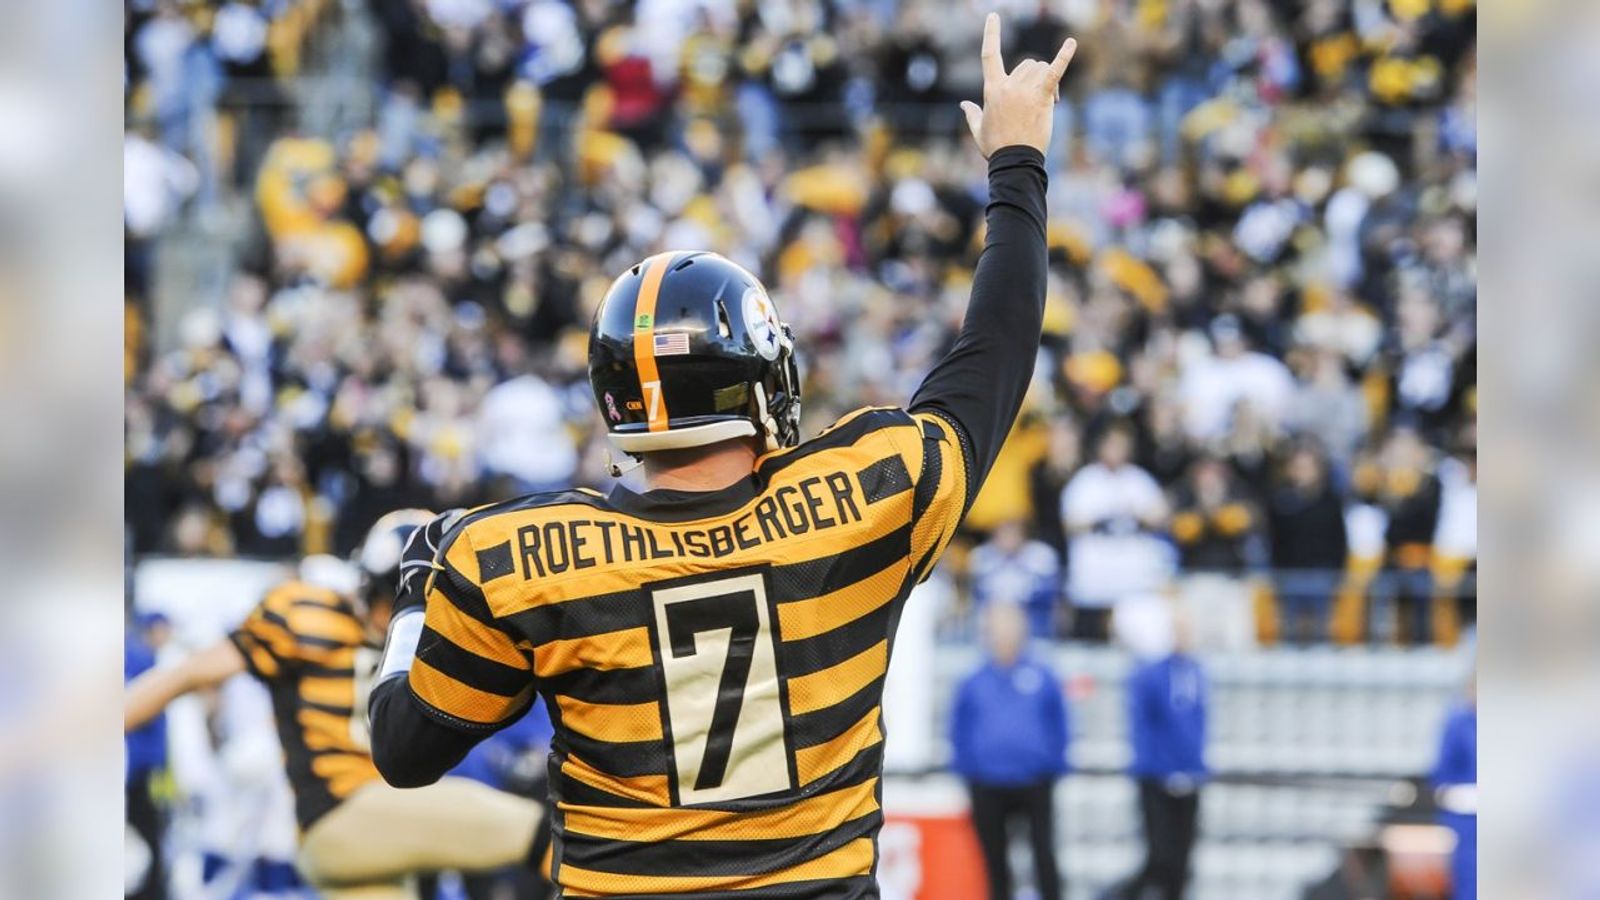 For 2 Weeks in 2014, the Steelers' Ben Roethlisberger was the